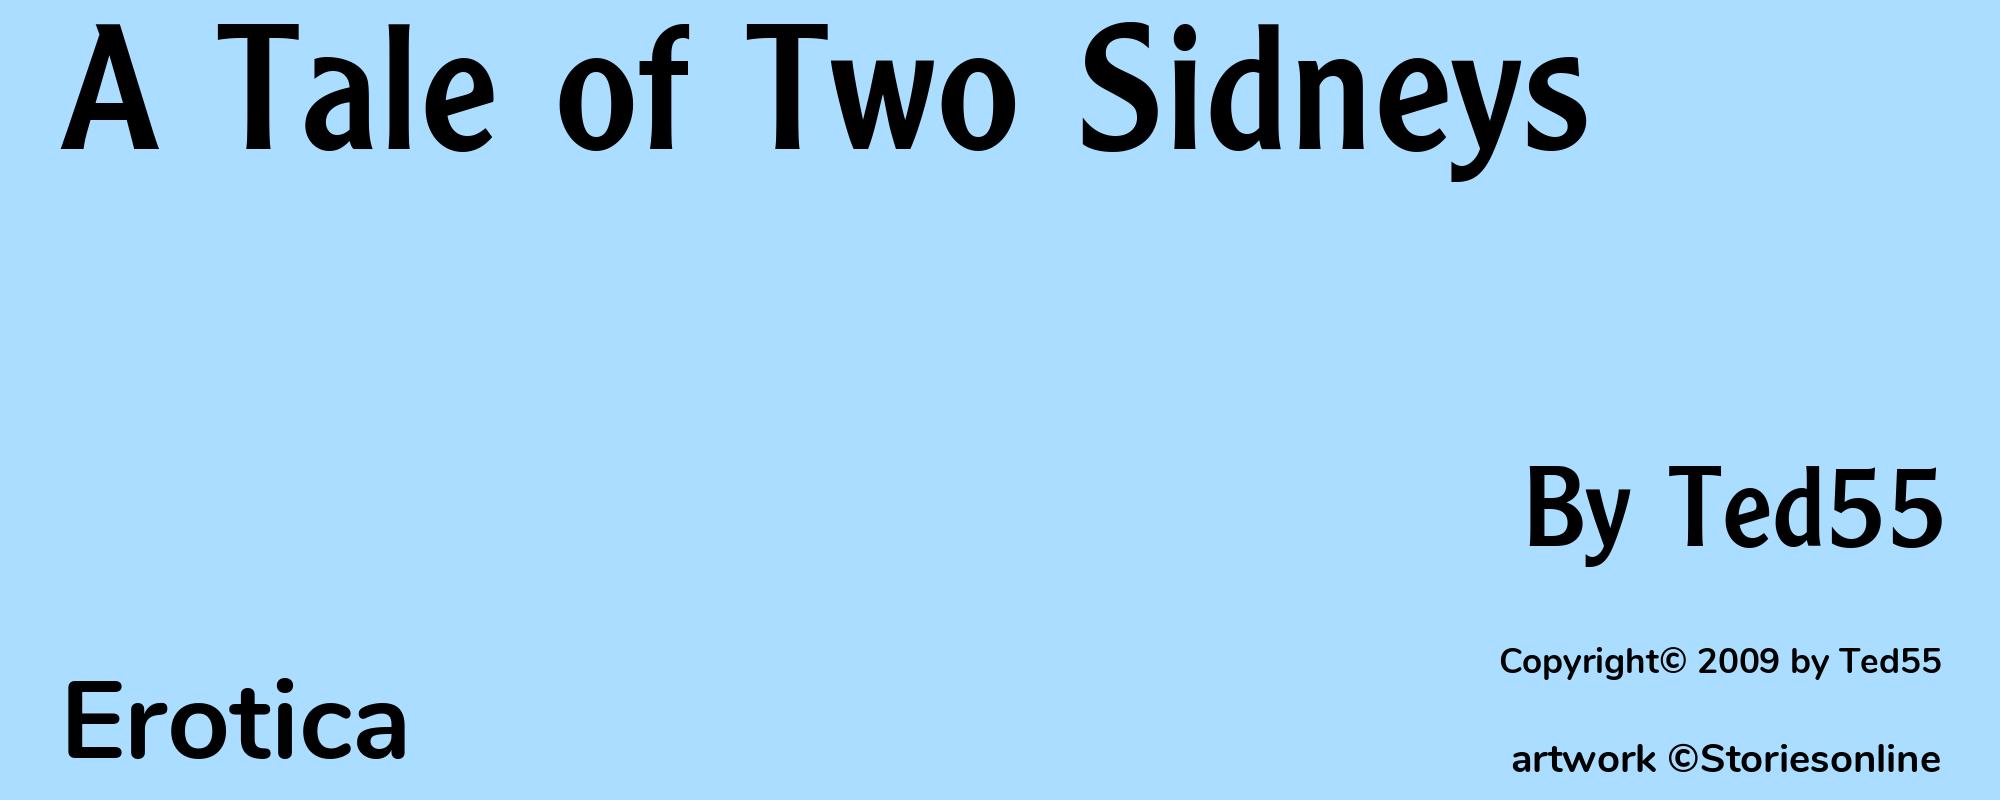 A Tale of Two Sidneys - Cover